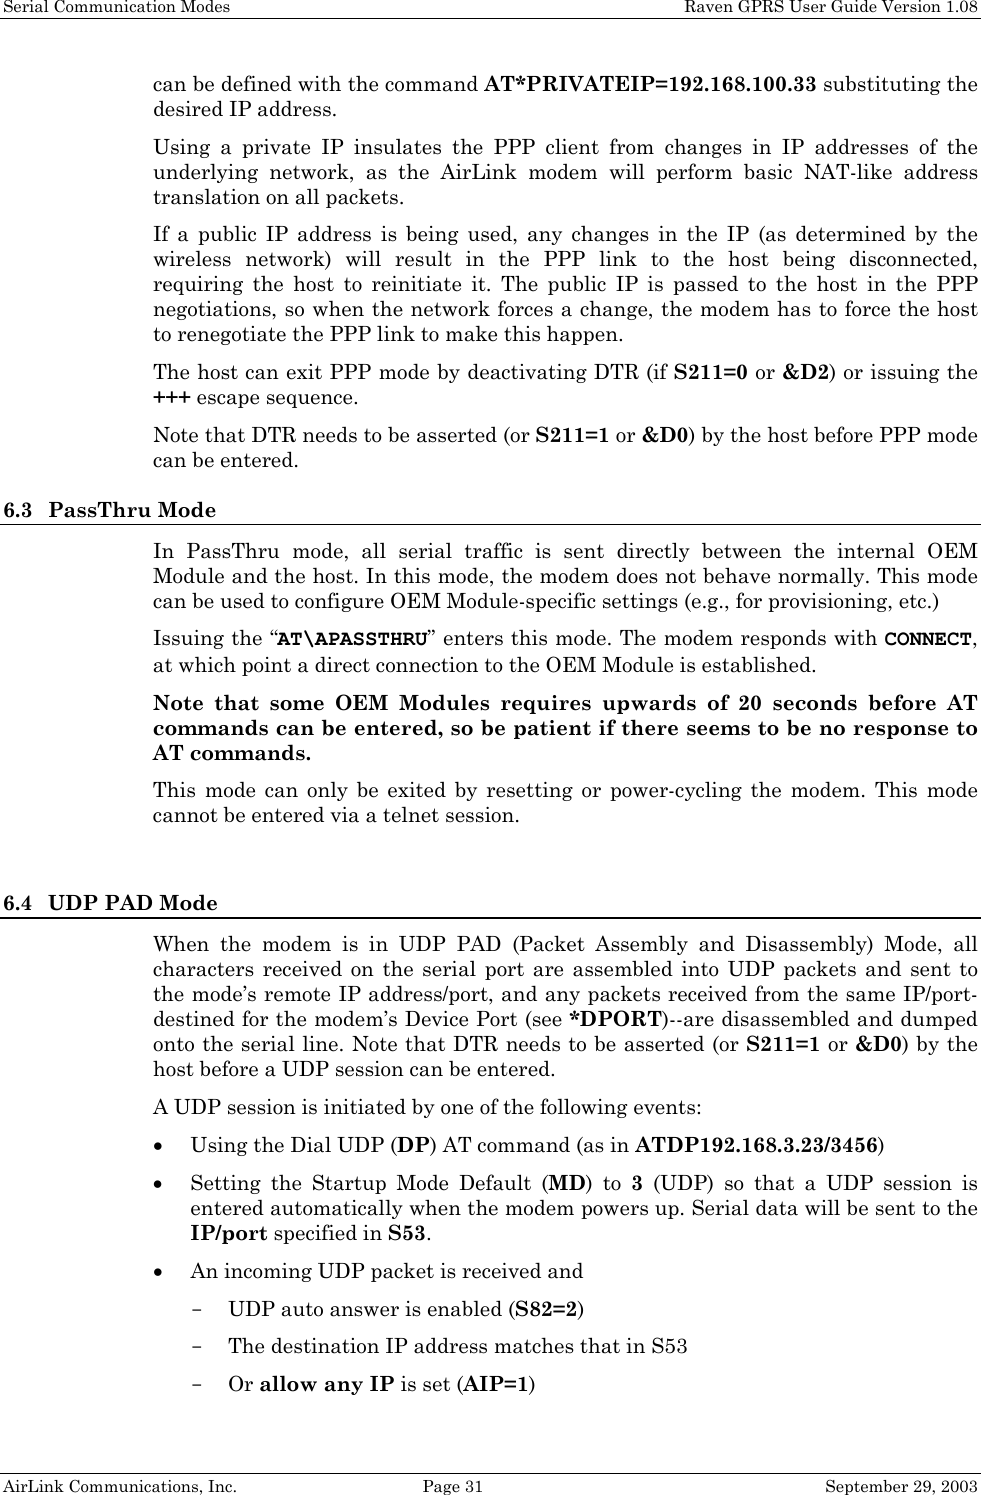 Serial Communication Modes    Raven GPRS User Guide Version 1.08 AirLink Communications, Inc.  Page 31  September 29, 2003 can be defined with the command AT*PRIVATEIP=192.168.100.33 substituting the desired IP address. Using a private IP insulates the PPP client from changes in IP addresses of the underlying network, as the AirLink modem will perform basic NAT-like address translation on all packets.  If a public IP address is being used, any changes in the IP (as determined by the wireless network) will result in the PPP link to the host being disconnected, requiring the host to reinitiate it. The public IP is passed to the host in the PPP negotiations, so when the network forces a change, the modem has to force the host to renegotiate the PPP link to make this happen. The host can exit PPP mode by deactivating DTR (if S211=0 or &amp;D2) or issuing the +++ escape sequence. Note that DTR needs to be asserted (or S211=1 or &amp;D0) by the host before PPP mode can be entered. 6.3 PassThru Mode In PassThru mode, all serial traffic is sent directly between the internal OEM Module and the host. In this mode, the modem does not behave normally. This mode can be used to configure OEM Module-specific settings (e.g., for provisioning, etc.) Issuing the “AT\APASSTHRU” enters this mode. The modem responds with CONNECT, at which point a direct connection to the OEM Module is established.  Note that some OEM Modules requires upwards of 20 seconds before AT commands can be entered, so be patient if there seems to be no response to AT commands. This mode can only be exited by resetting or power-cycling the modem. This mode cannot be entered via a telnet session.  6.4 UDP PAD Mode When the modem is in UDP PAD (Packet Assembly and Disassembly) Mode, all characters received on the serial port are assembled into UDP packets and sent to the mode’s remote IP address/port, and any packets received from the same IP/port-destined for the modem’s Device Port (see *DPORT)--are disassembled and dumped onto the serial line. Note that DTR needs to be asserted (or S211=1 or &amp;D0) by the host before a UDP session can be entered. A UDP session is initiated by one of the following events: • Using the Dial UDP (DP) AT command (as in ATDP192.168.3.23/3456) • Setting the Startup Mode Default (MD) to 3 (UDP) so that a UDP session is entered automatically when the modem powers up. Serial data will be sent to the IP/port specified in S53. • An incoming UDP packet is received and - UDP auto answer is enabled (S82=2) - The destination IP address matches that in S53 - Or allow any IP is set (AIP=1) 